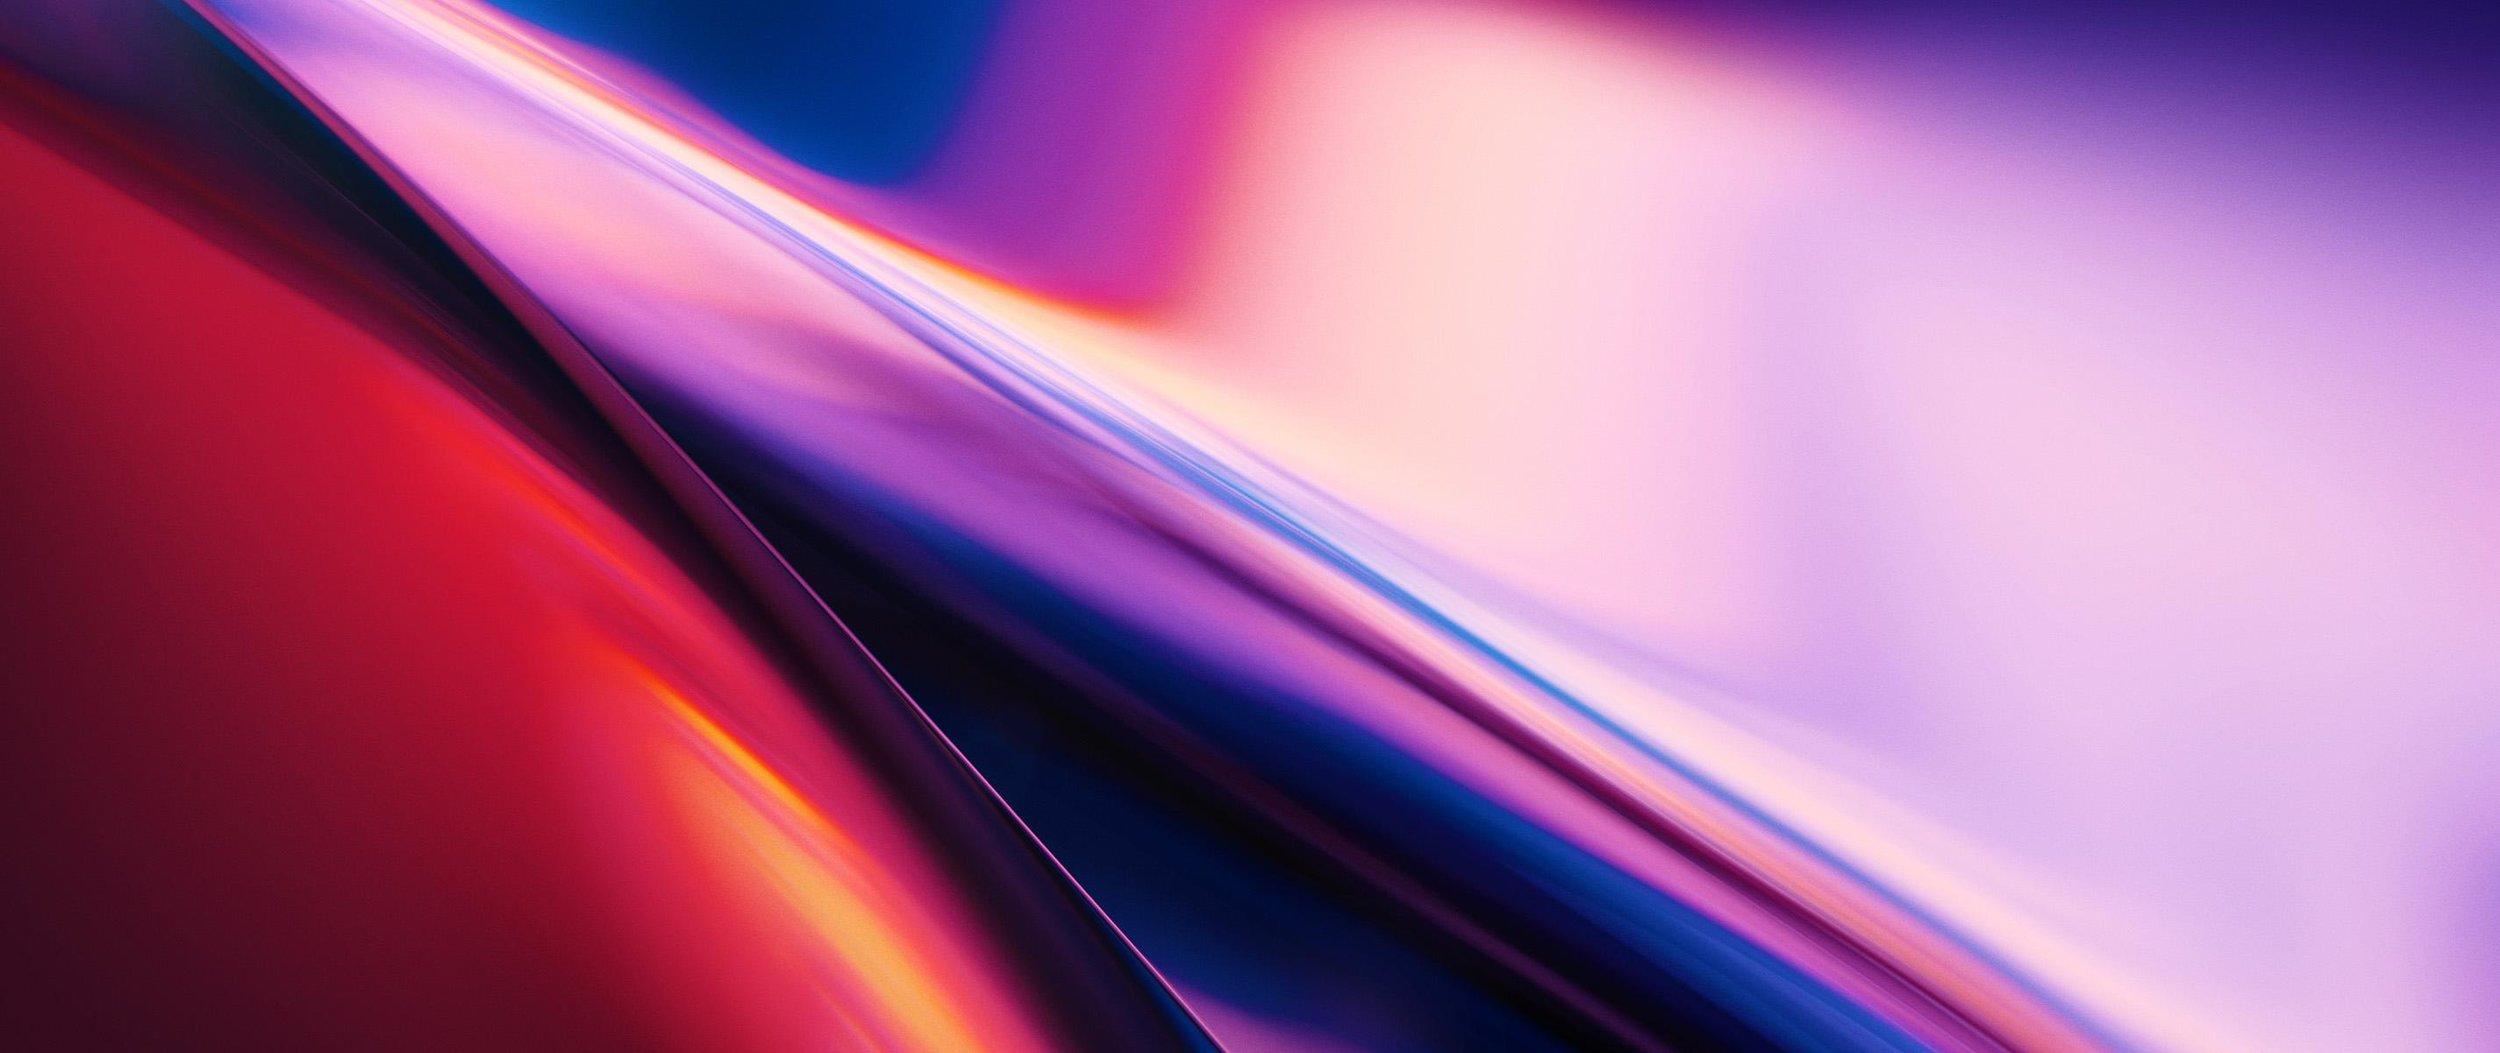 OnePlus 7 Series & Abstruct Wallpaper App Released!